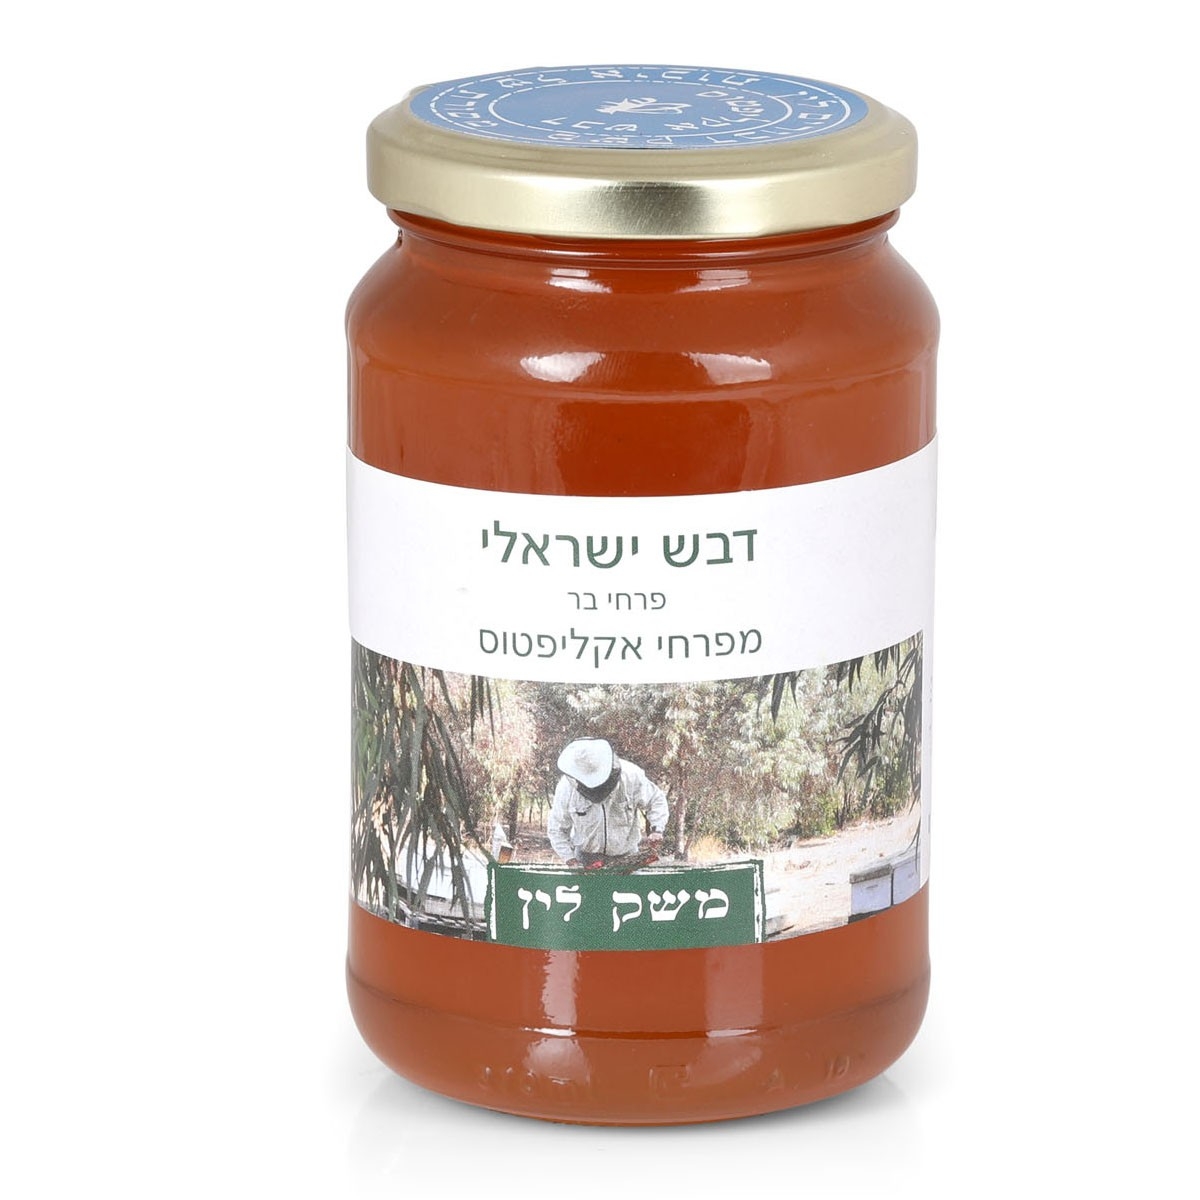 Lin’s Farm Pure Israeli Honey from Wildflowers and Eucalyptus Blossoms - 1